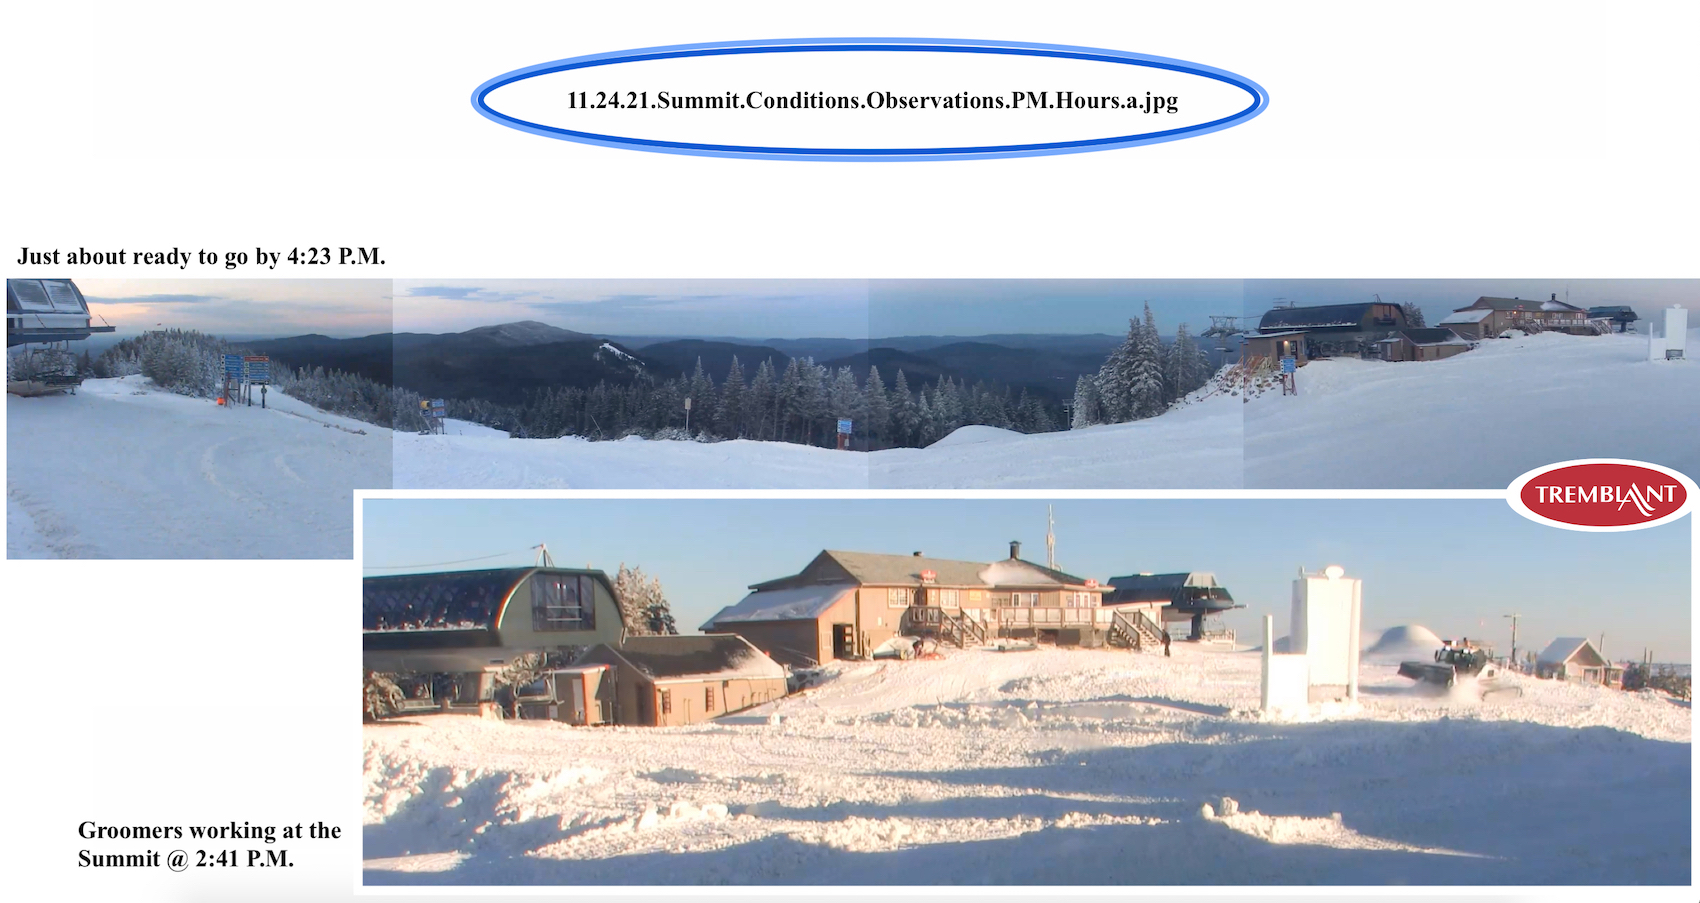 11.24.21.Summit.Conditions.Observations.PM.Hours.a.jpg